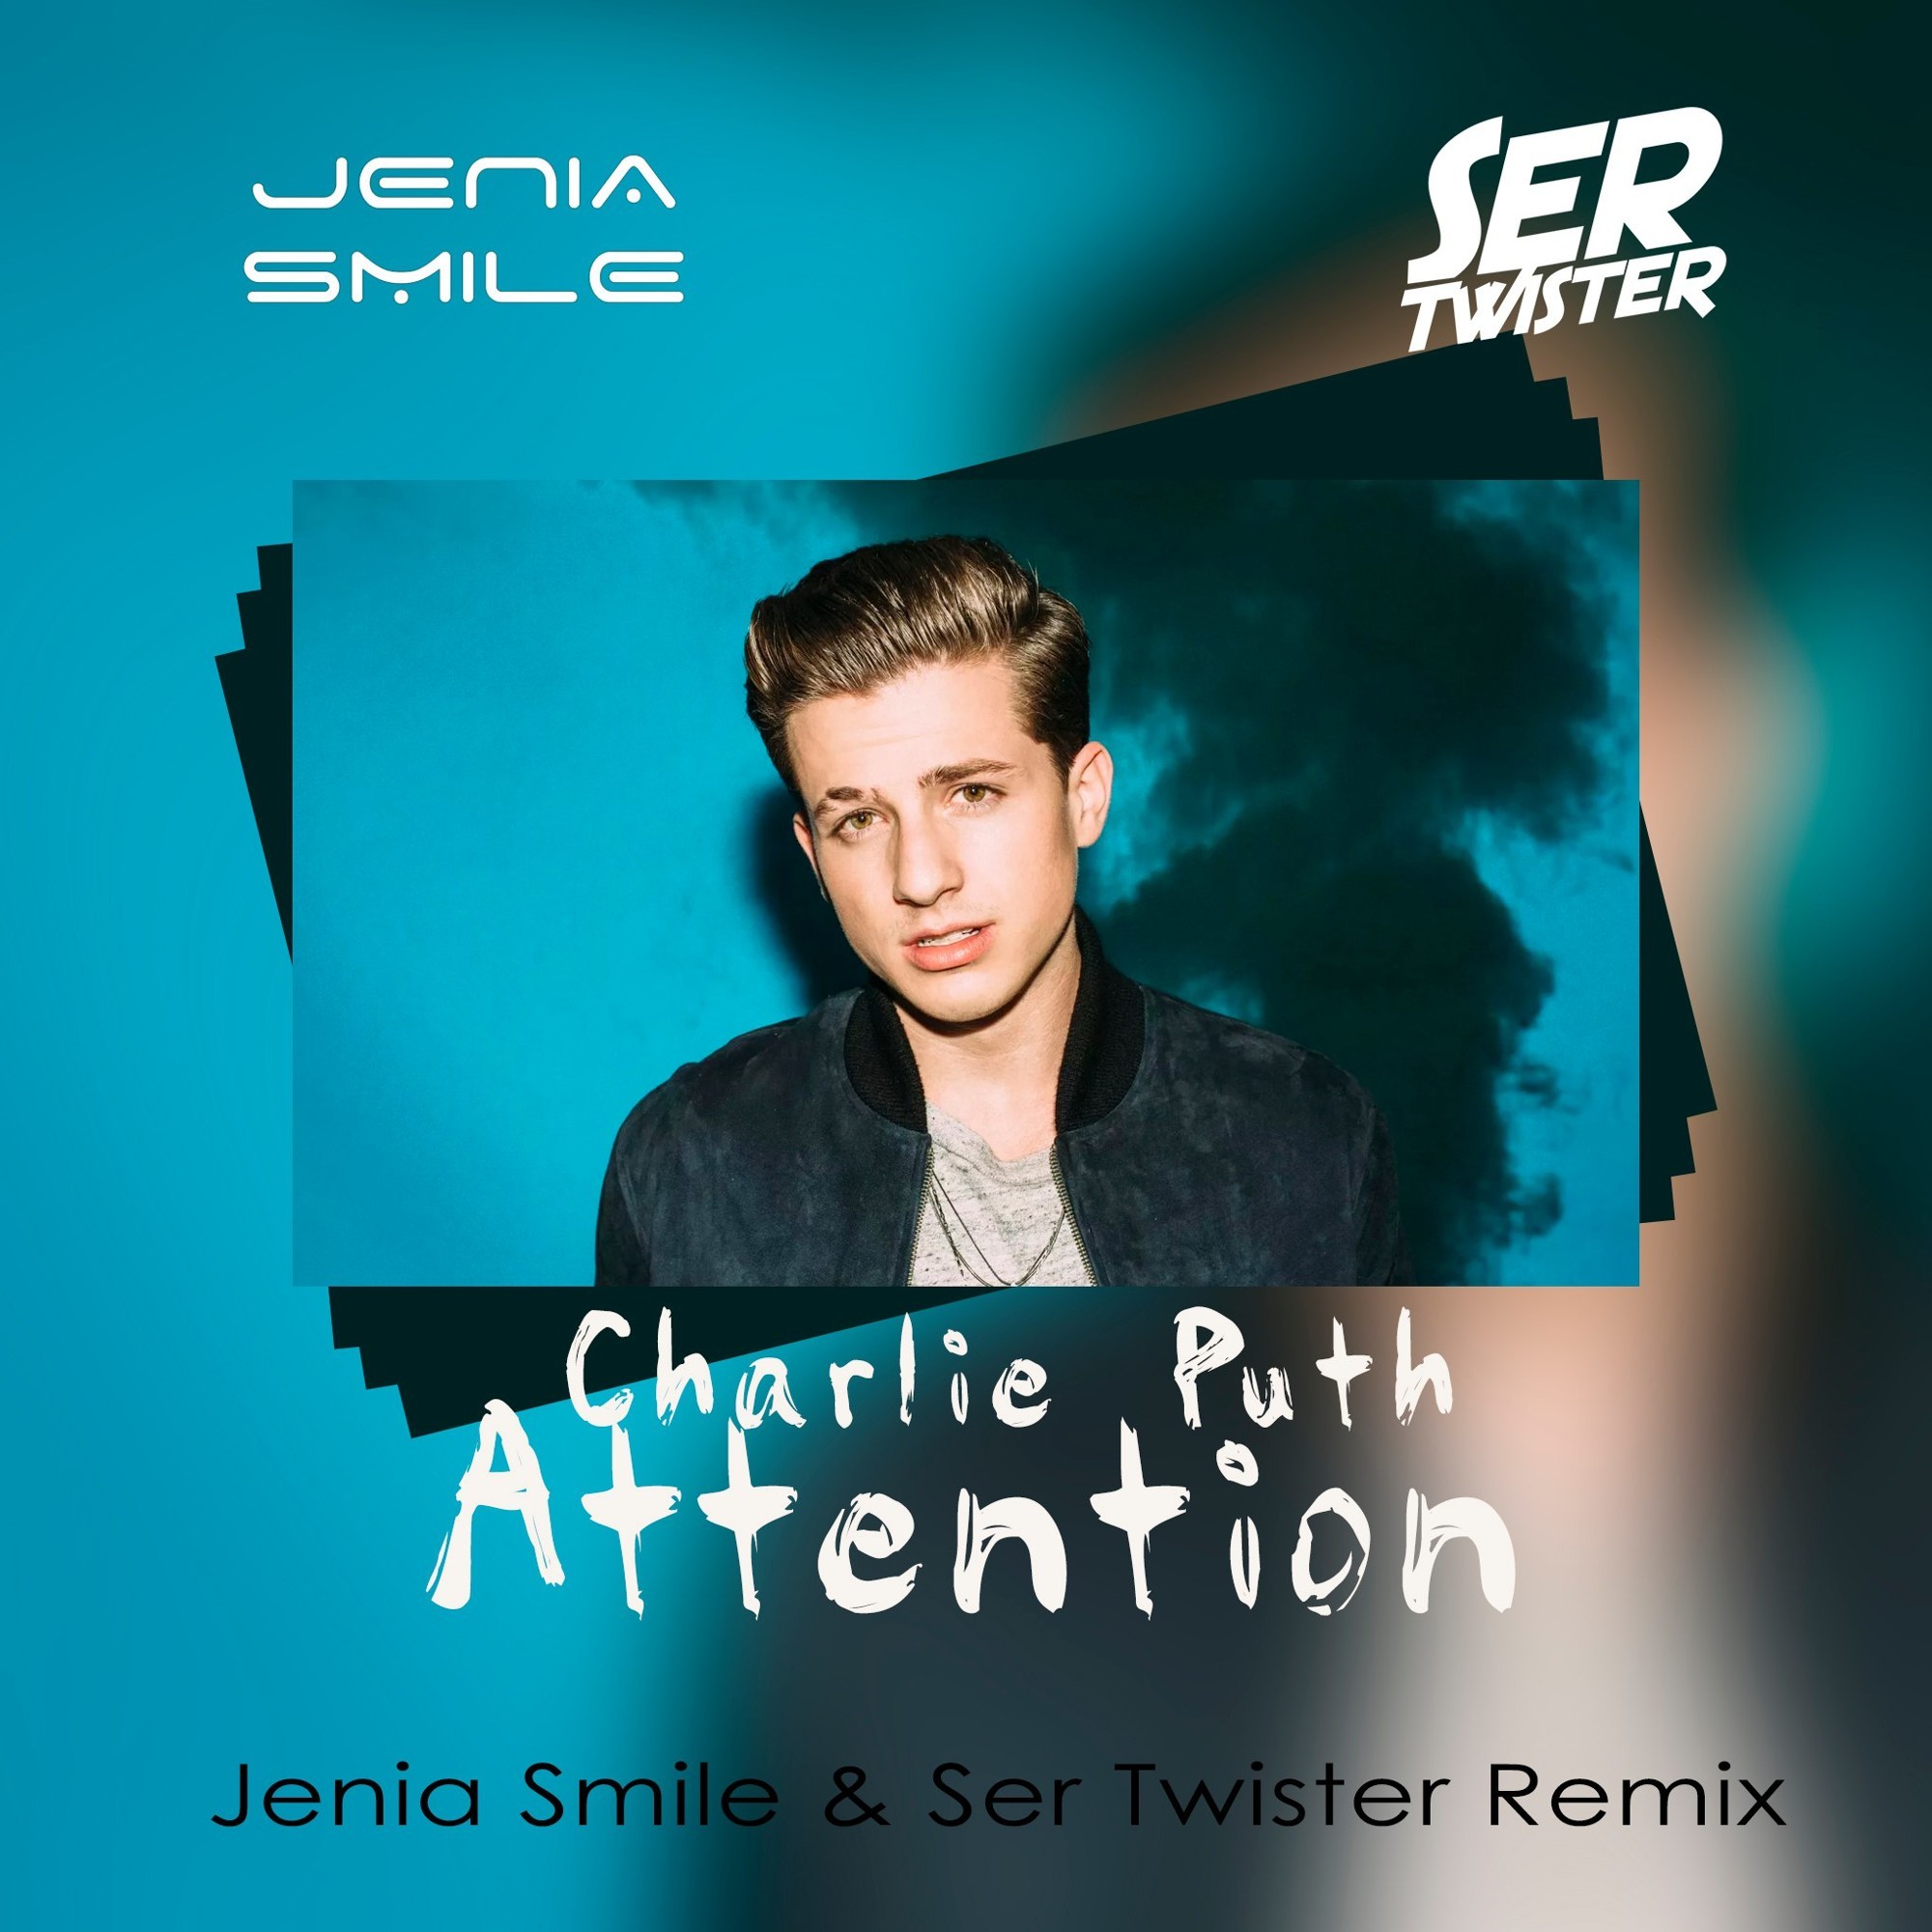 Charlie Puth - Attention (Ser Twister & Jenia Smile Extended Remix) .